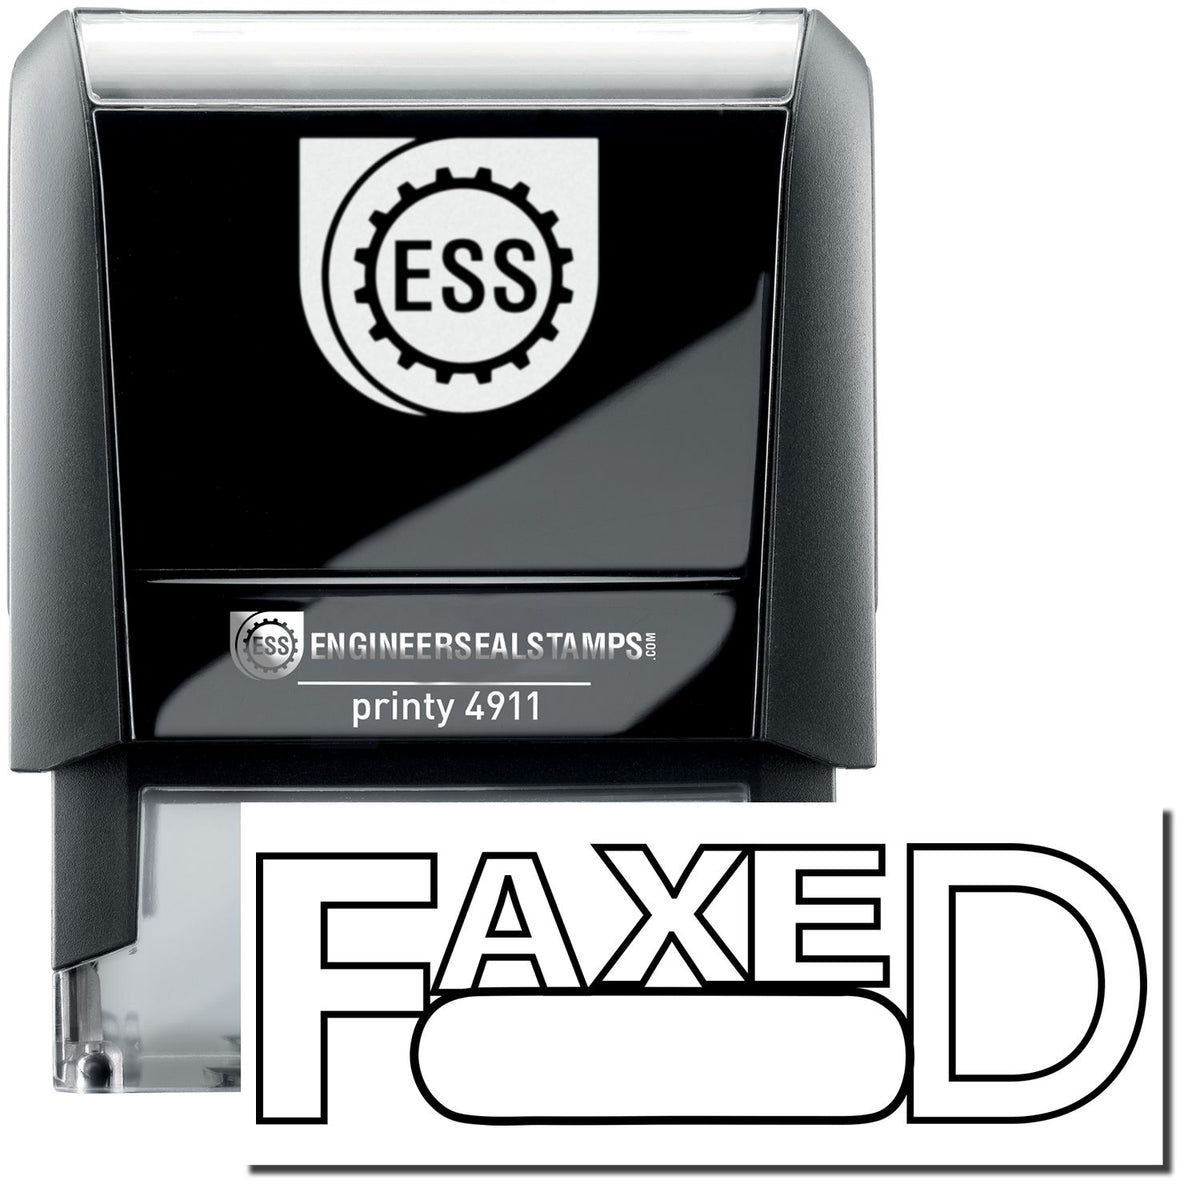 A self-inking stamp with a stamped image showing how the text &quot;FAXED&quot; in an outline style with a round date box is displayed after stamping.